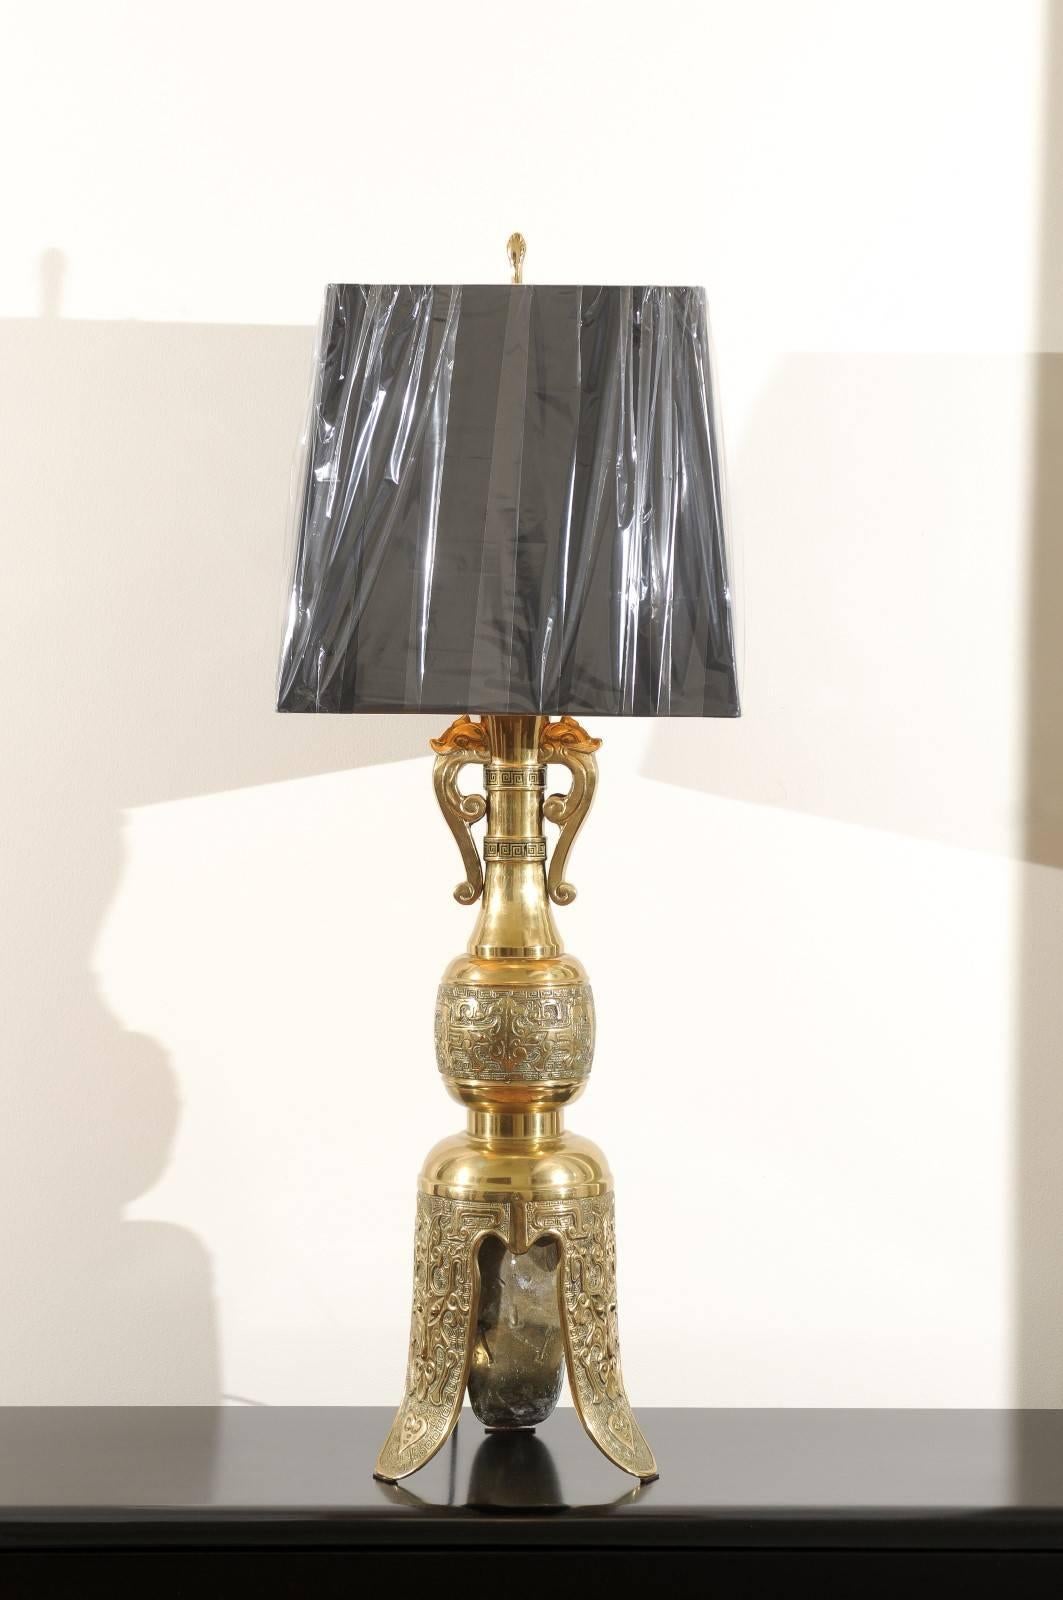 An absolutely jaw-dropping pair of large-scale vintage lamps, circa 1960. Exquisite solid brass form with stunning texture. Fabulous cast elephant heads and Greek key detail highlight the neck. The magnificent base recalls the look of an ancient